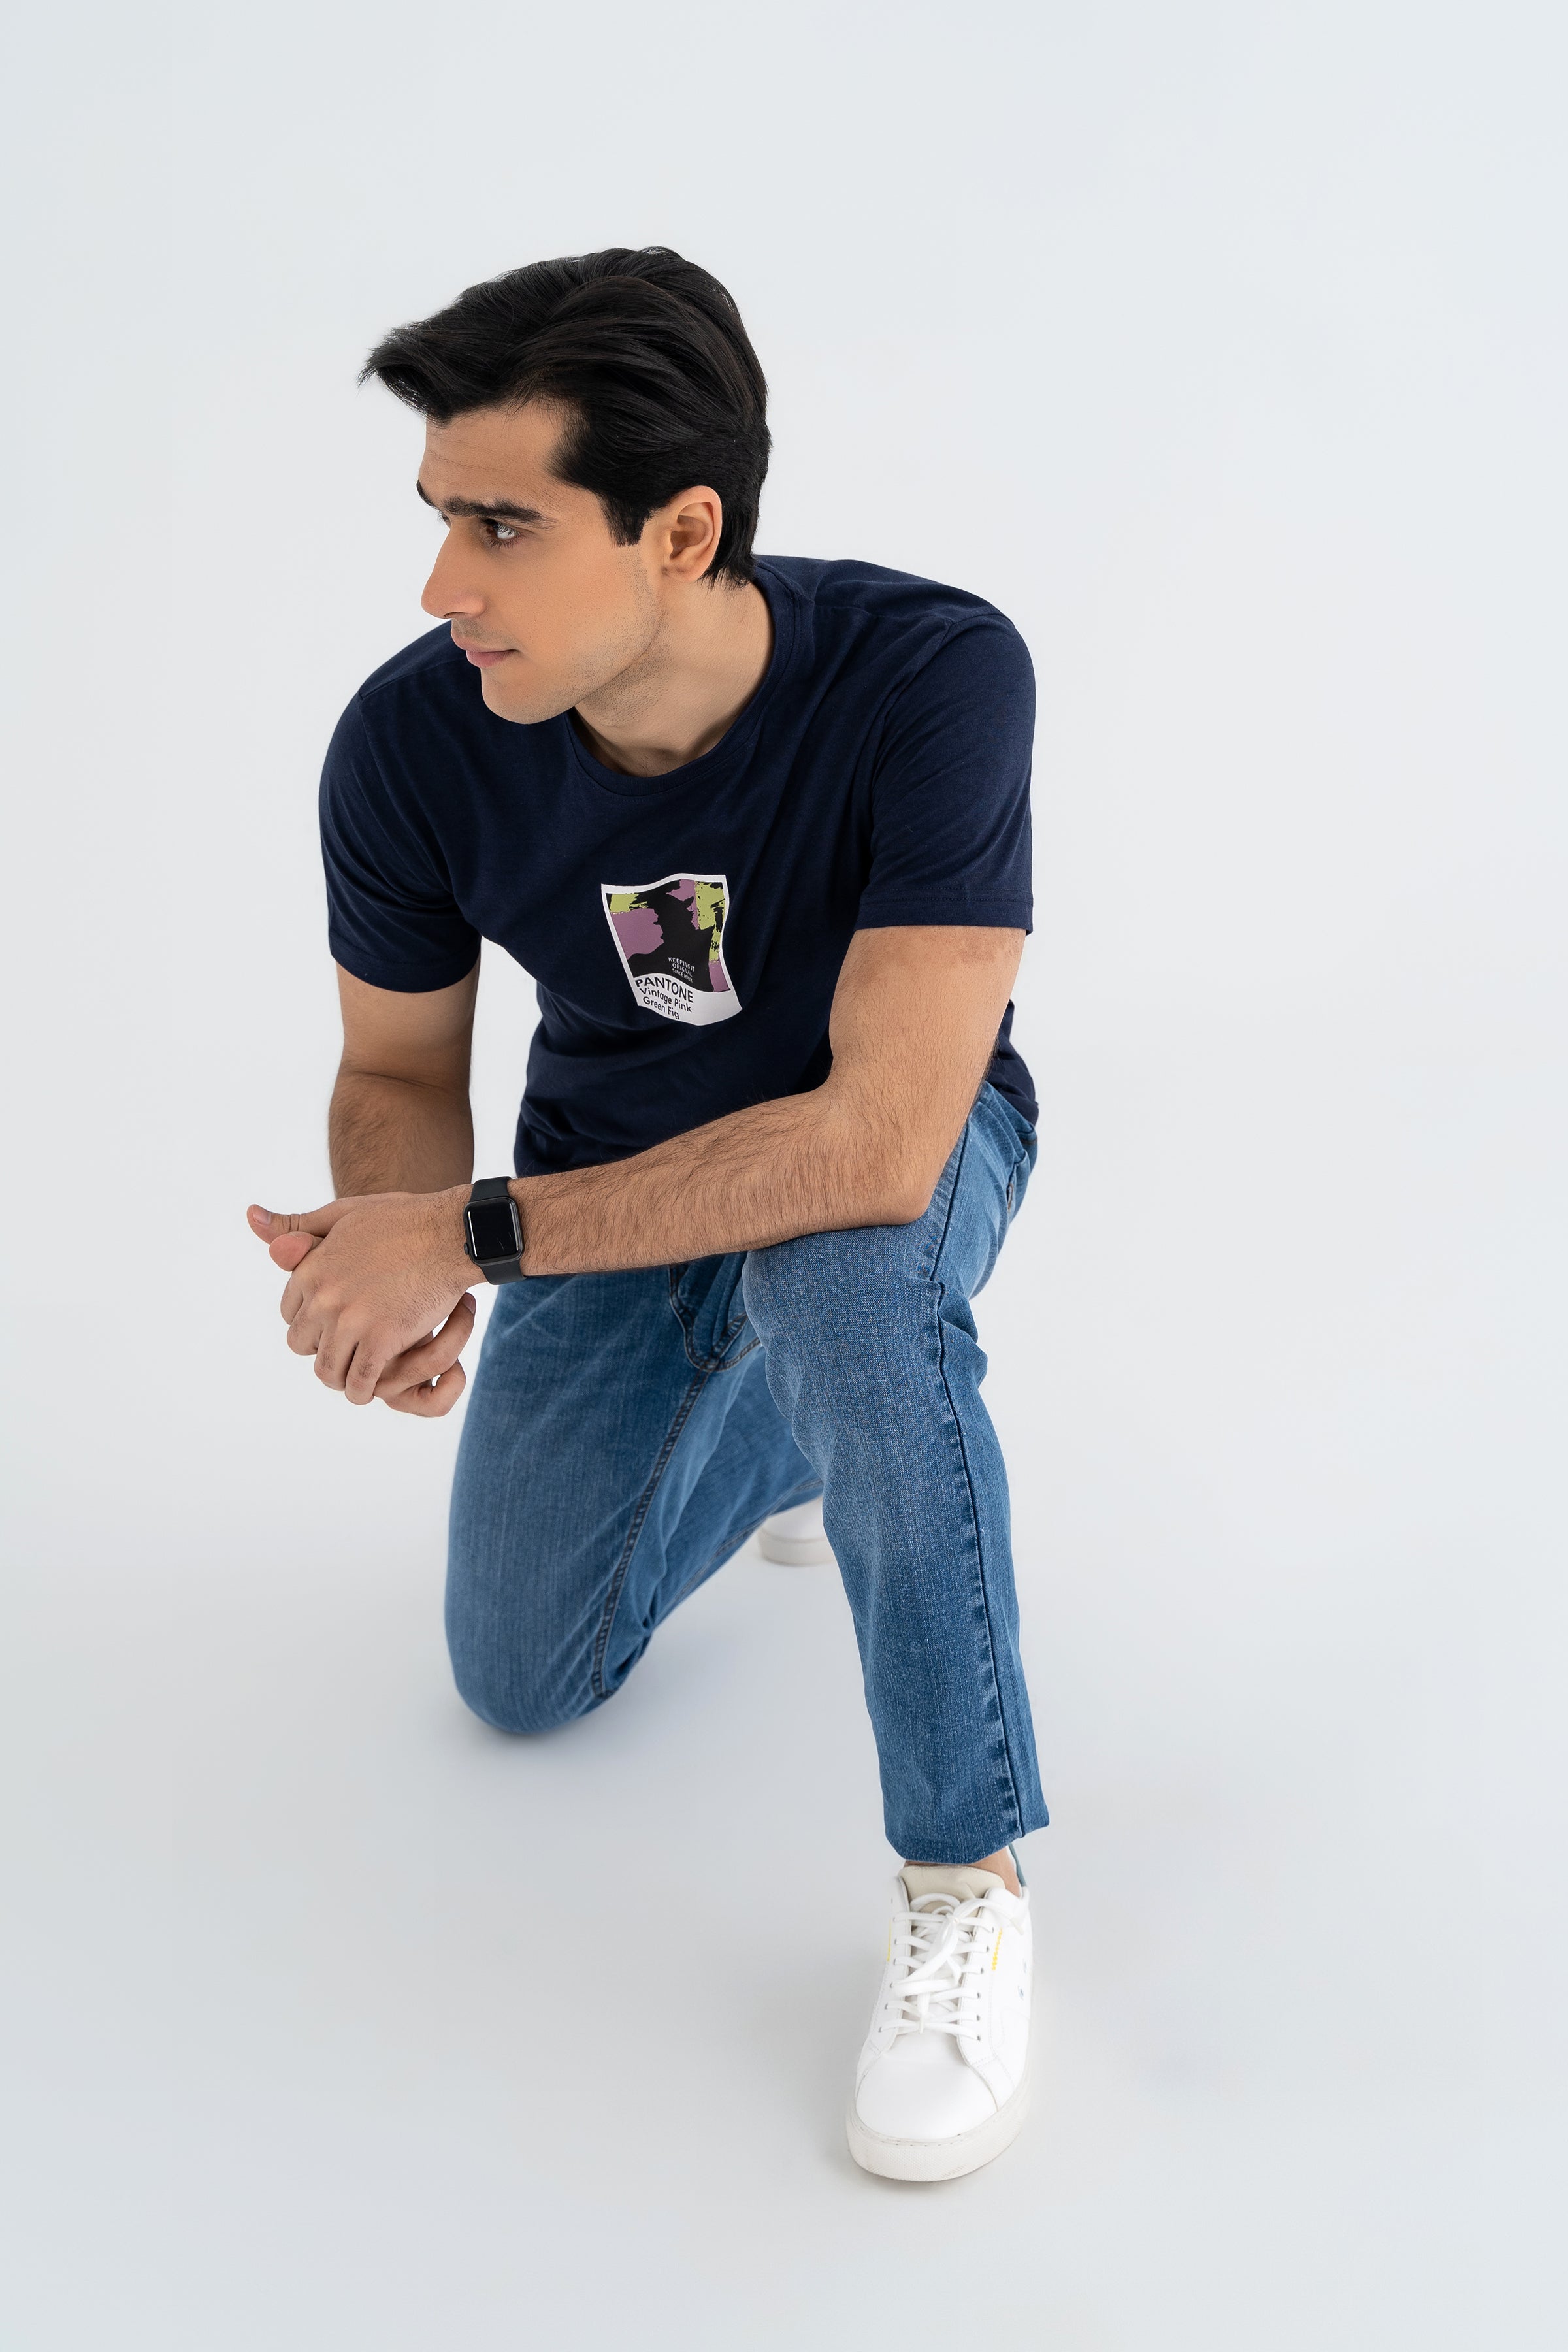 Your Go-To Navy Tee